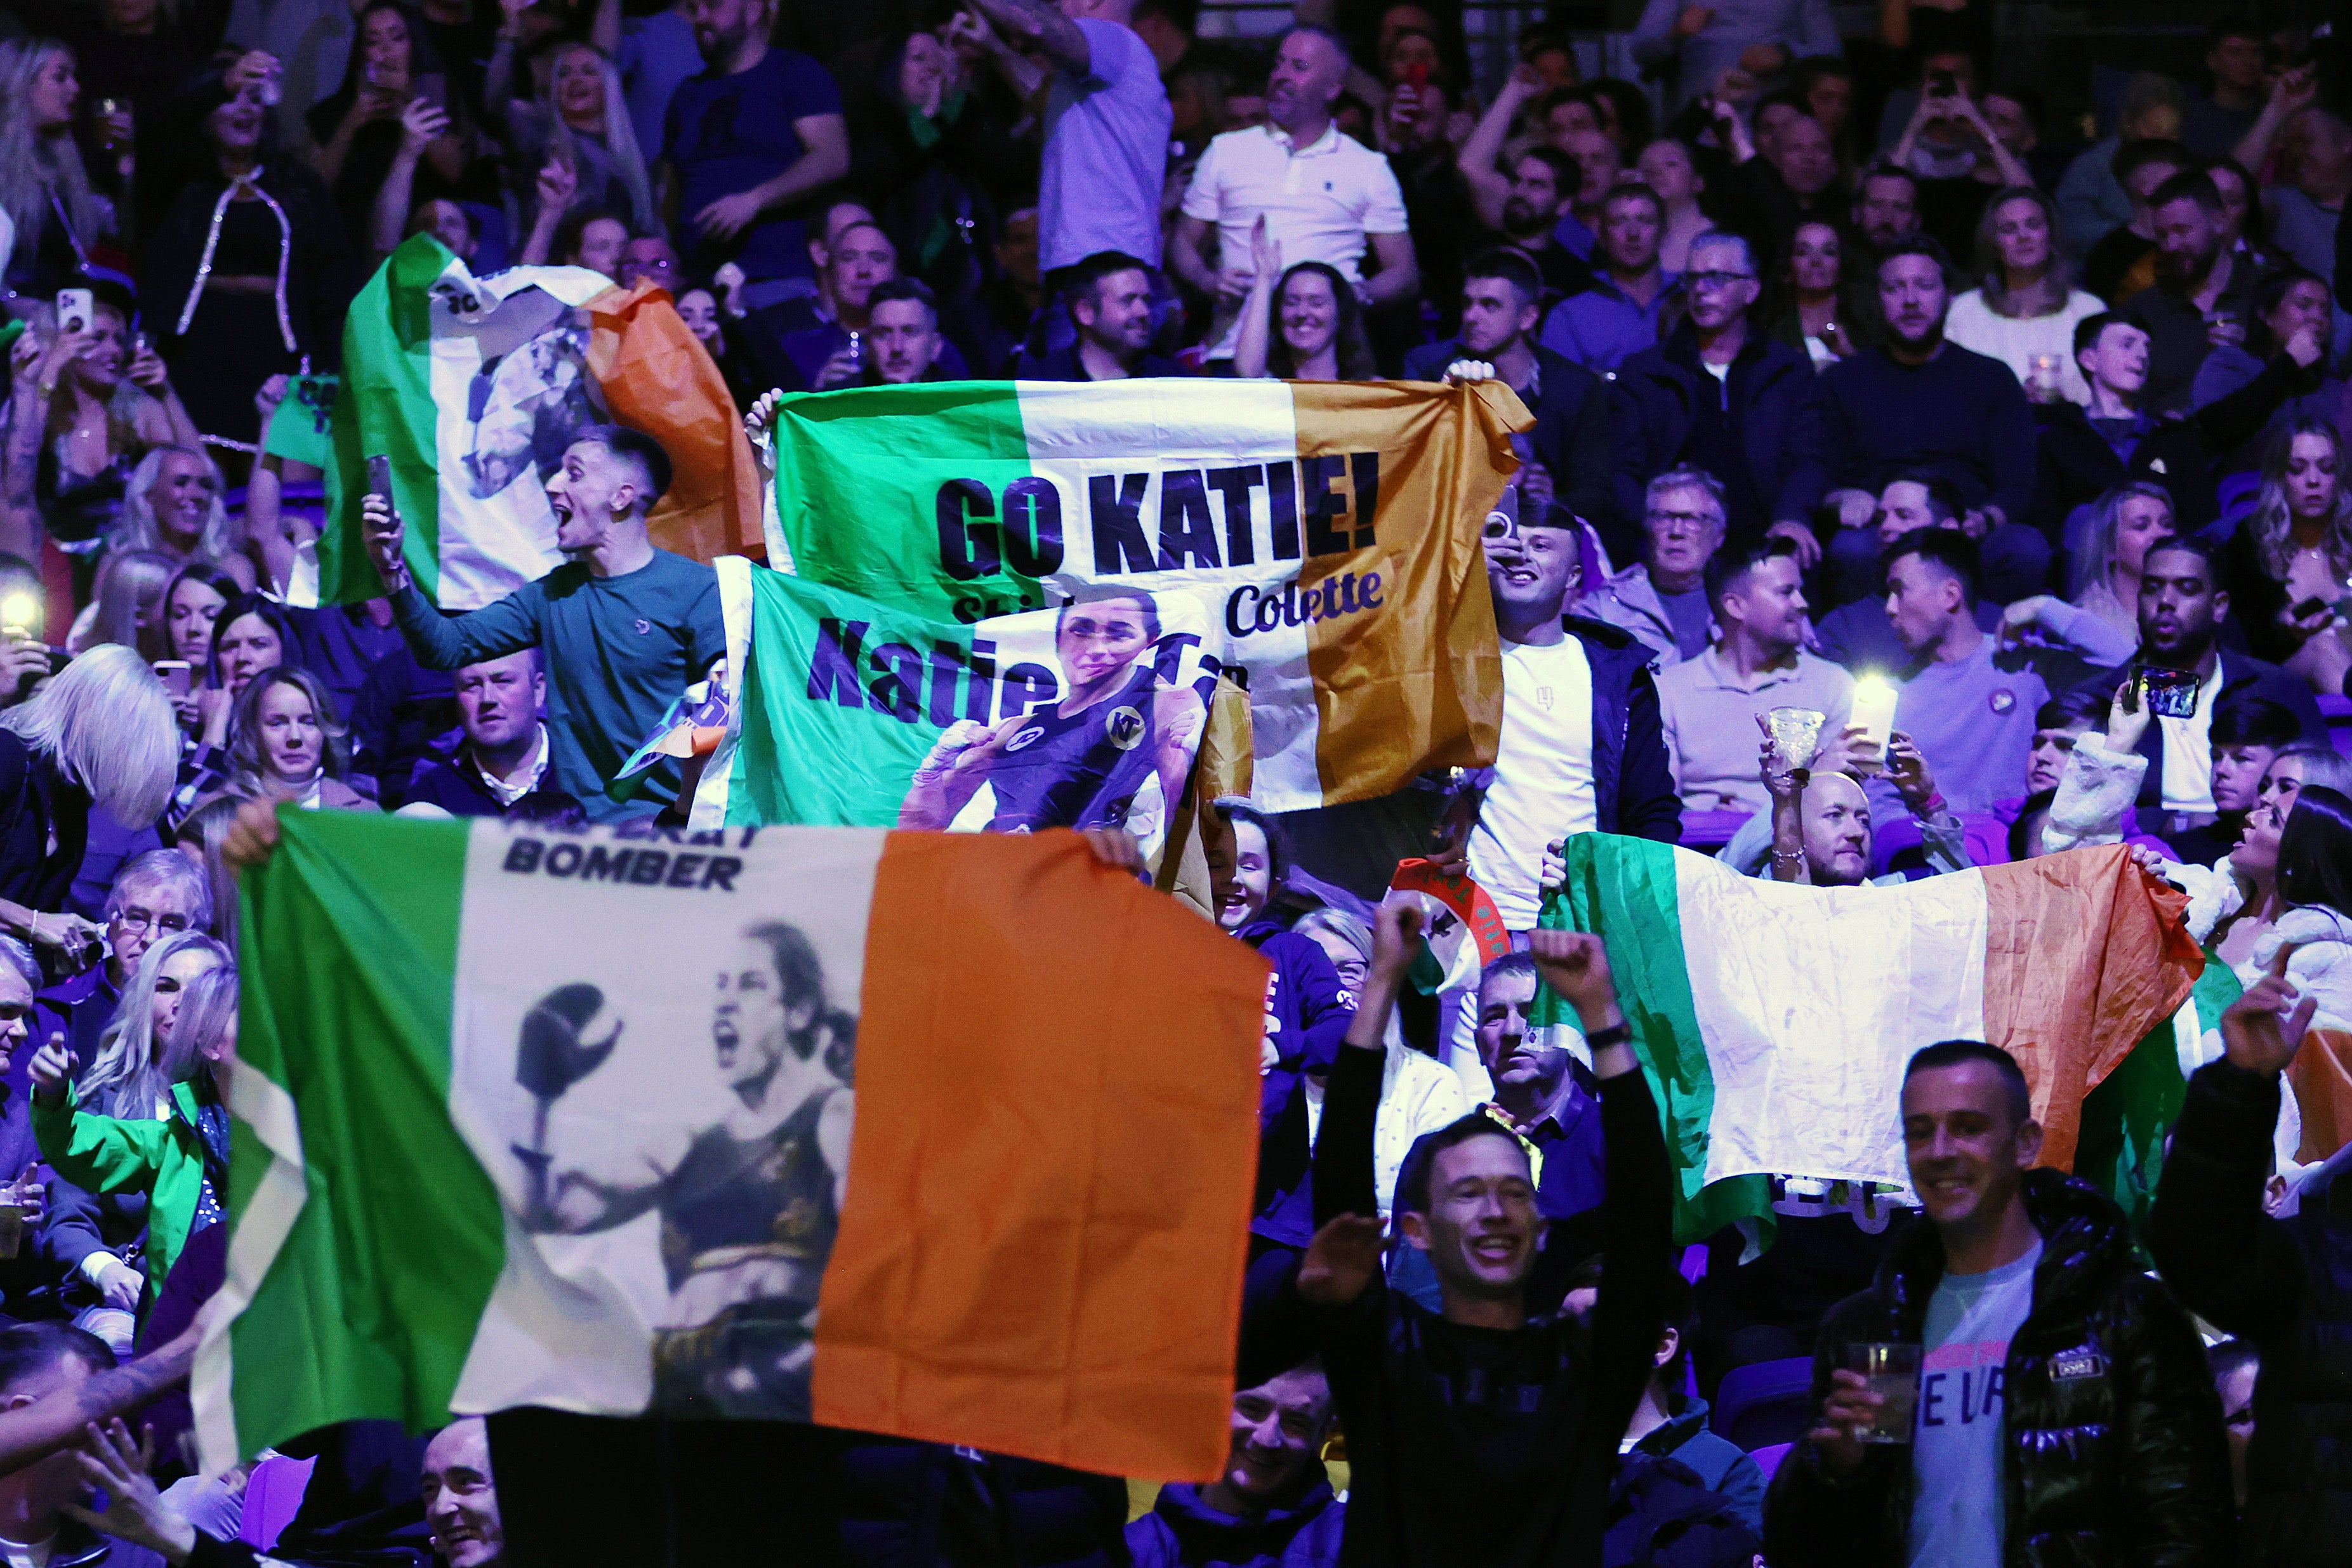 Fans enjoying the pre-fight atmosphere in the 3Arena